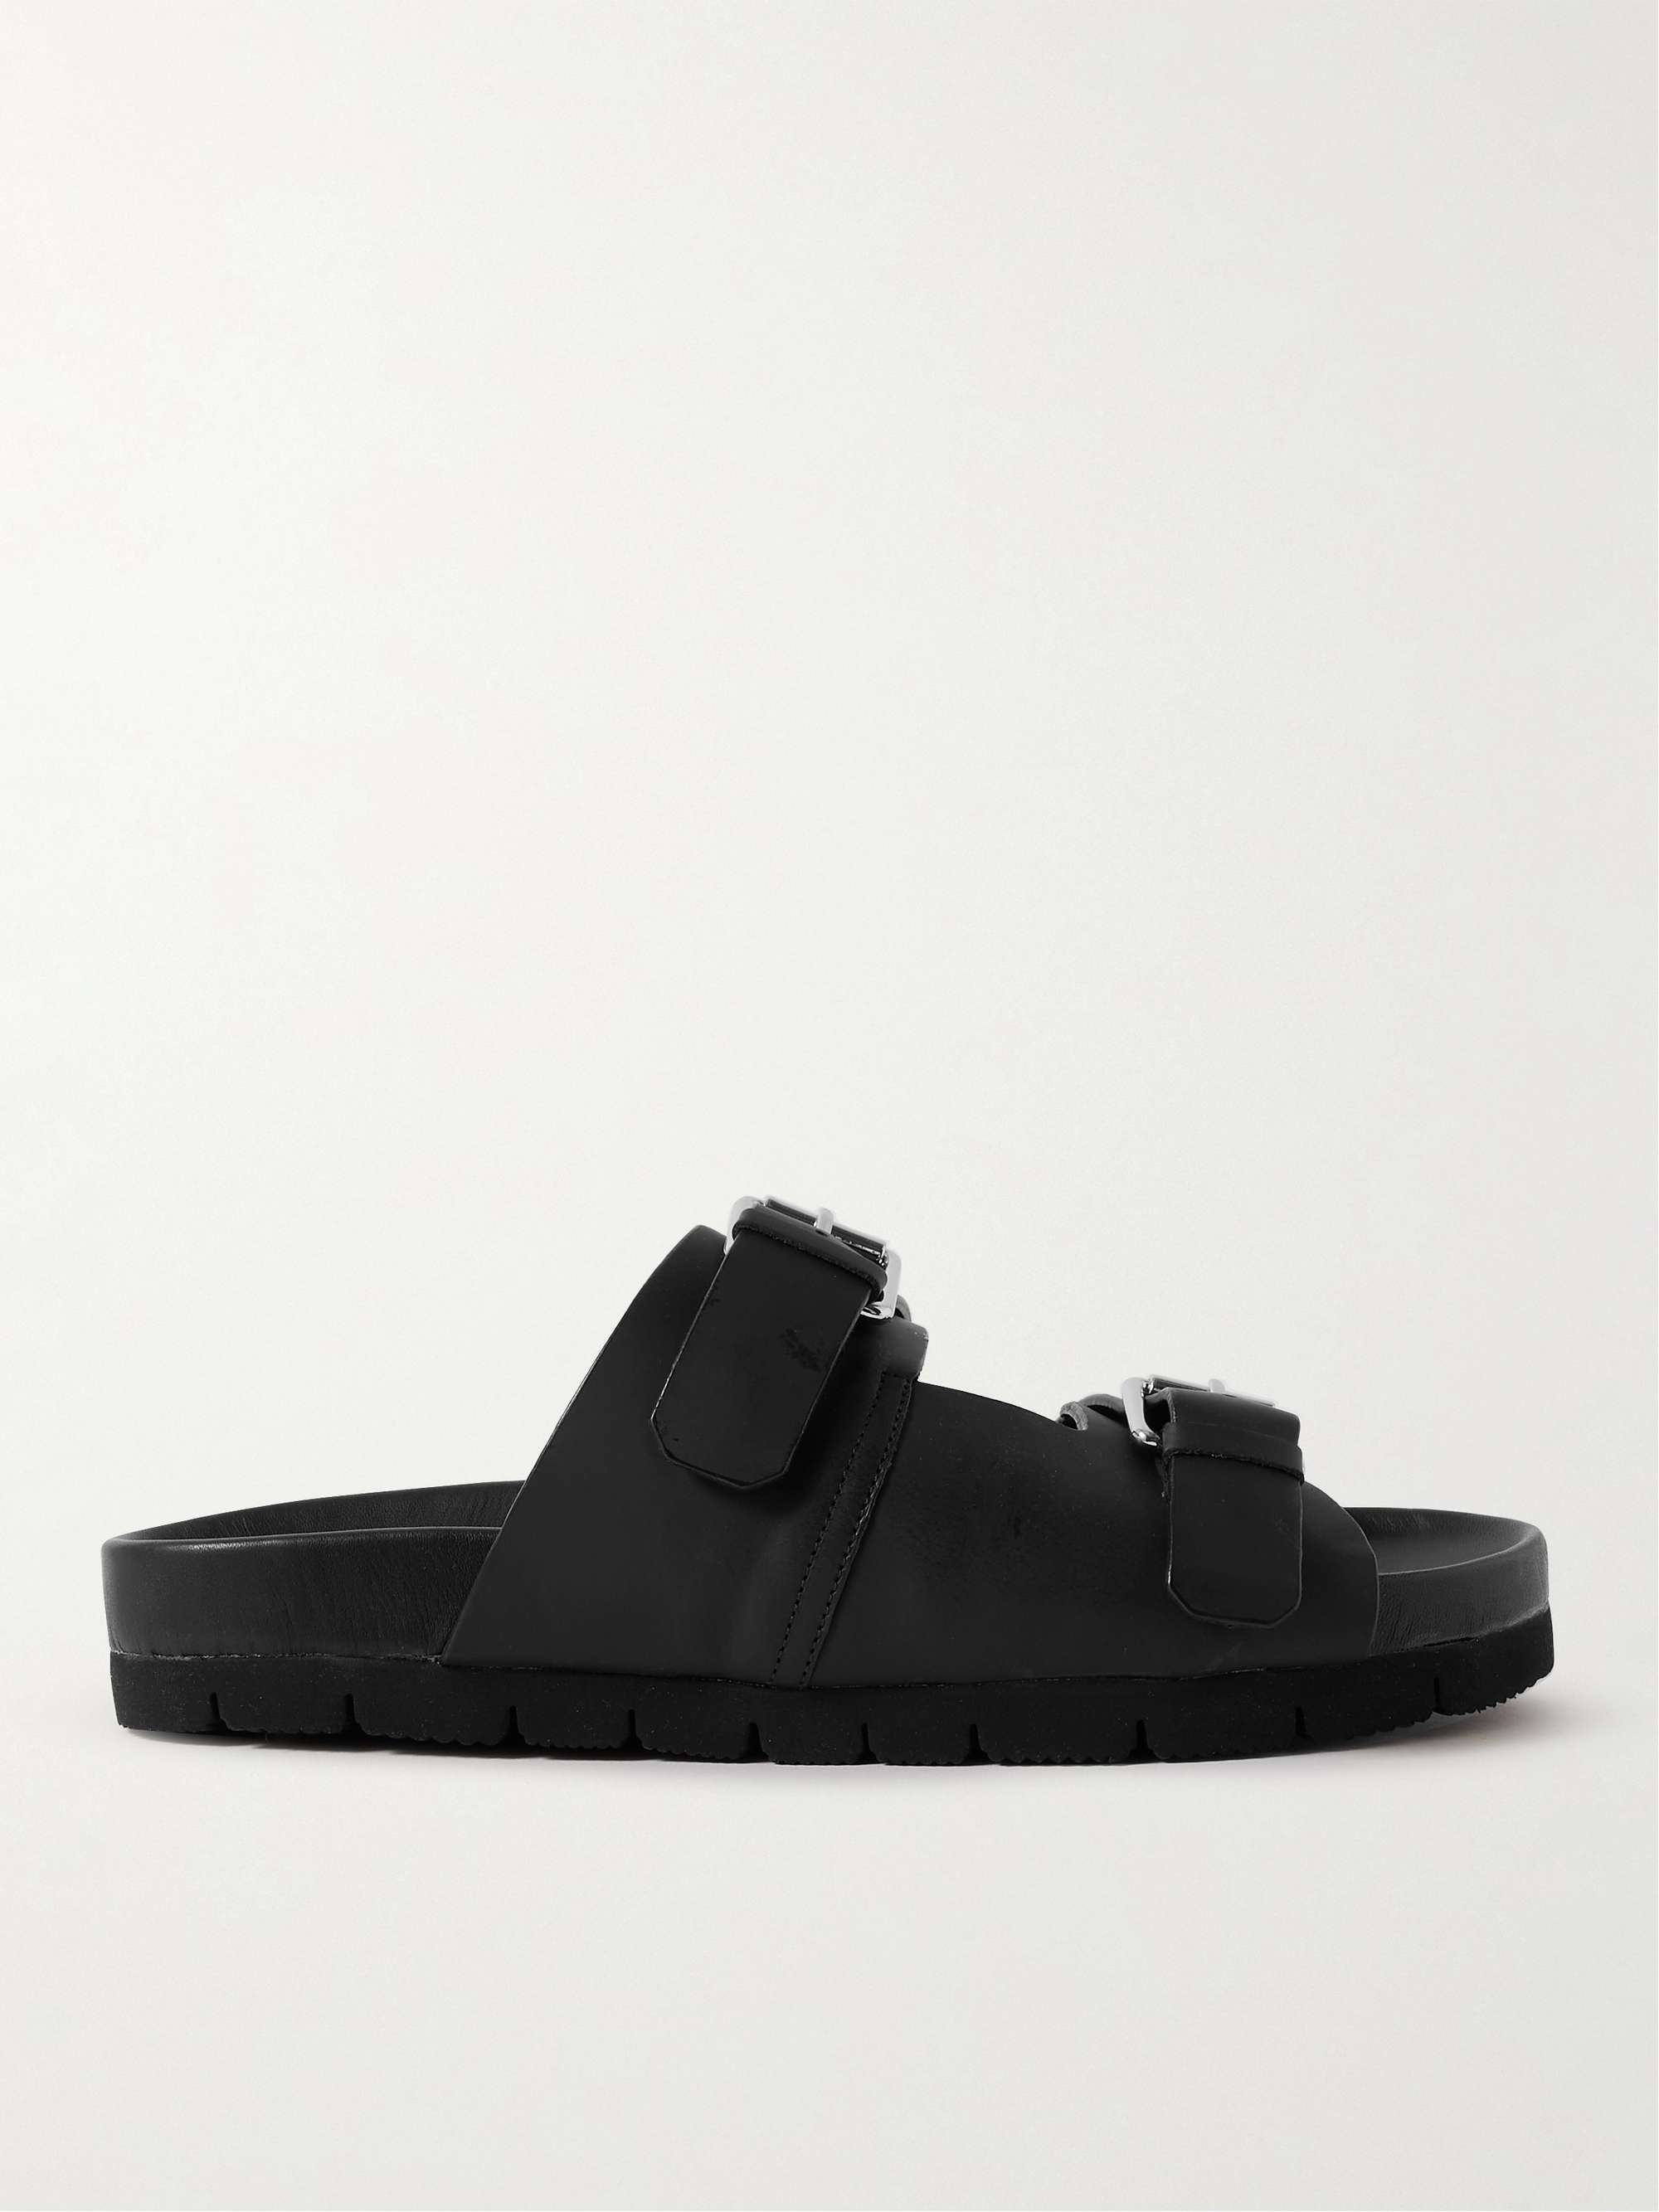 GRENSON Florin Rubberised Leather Sandals